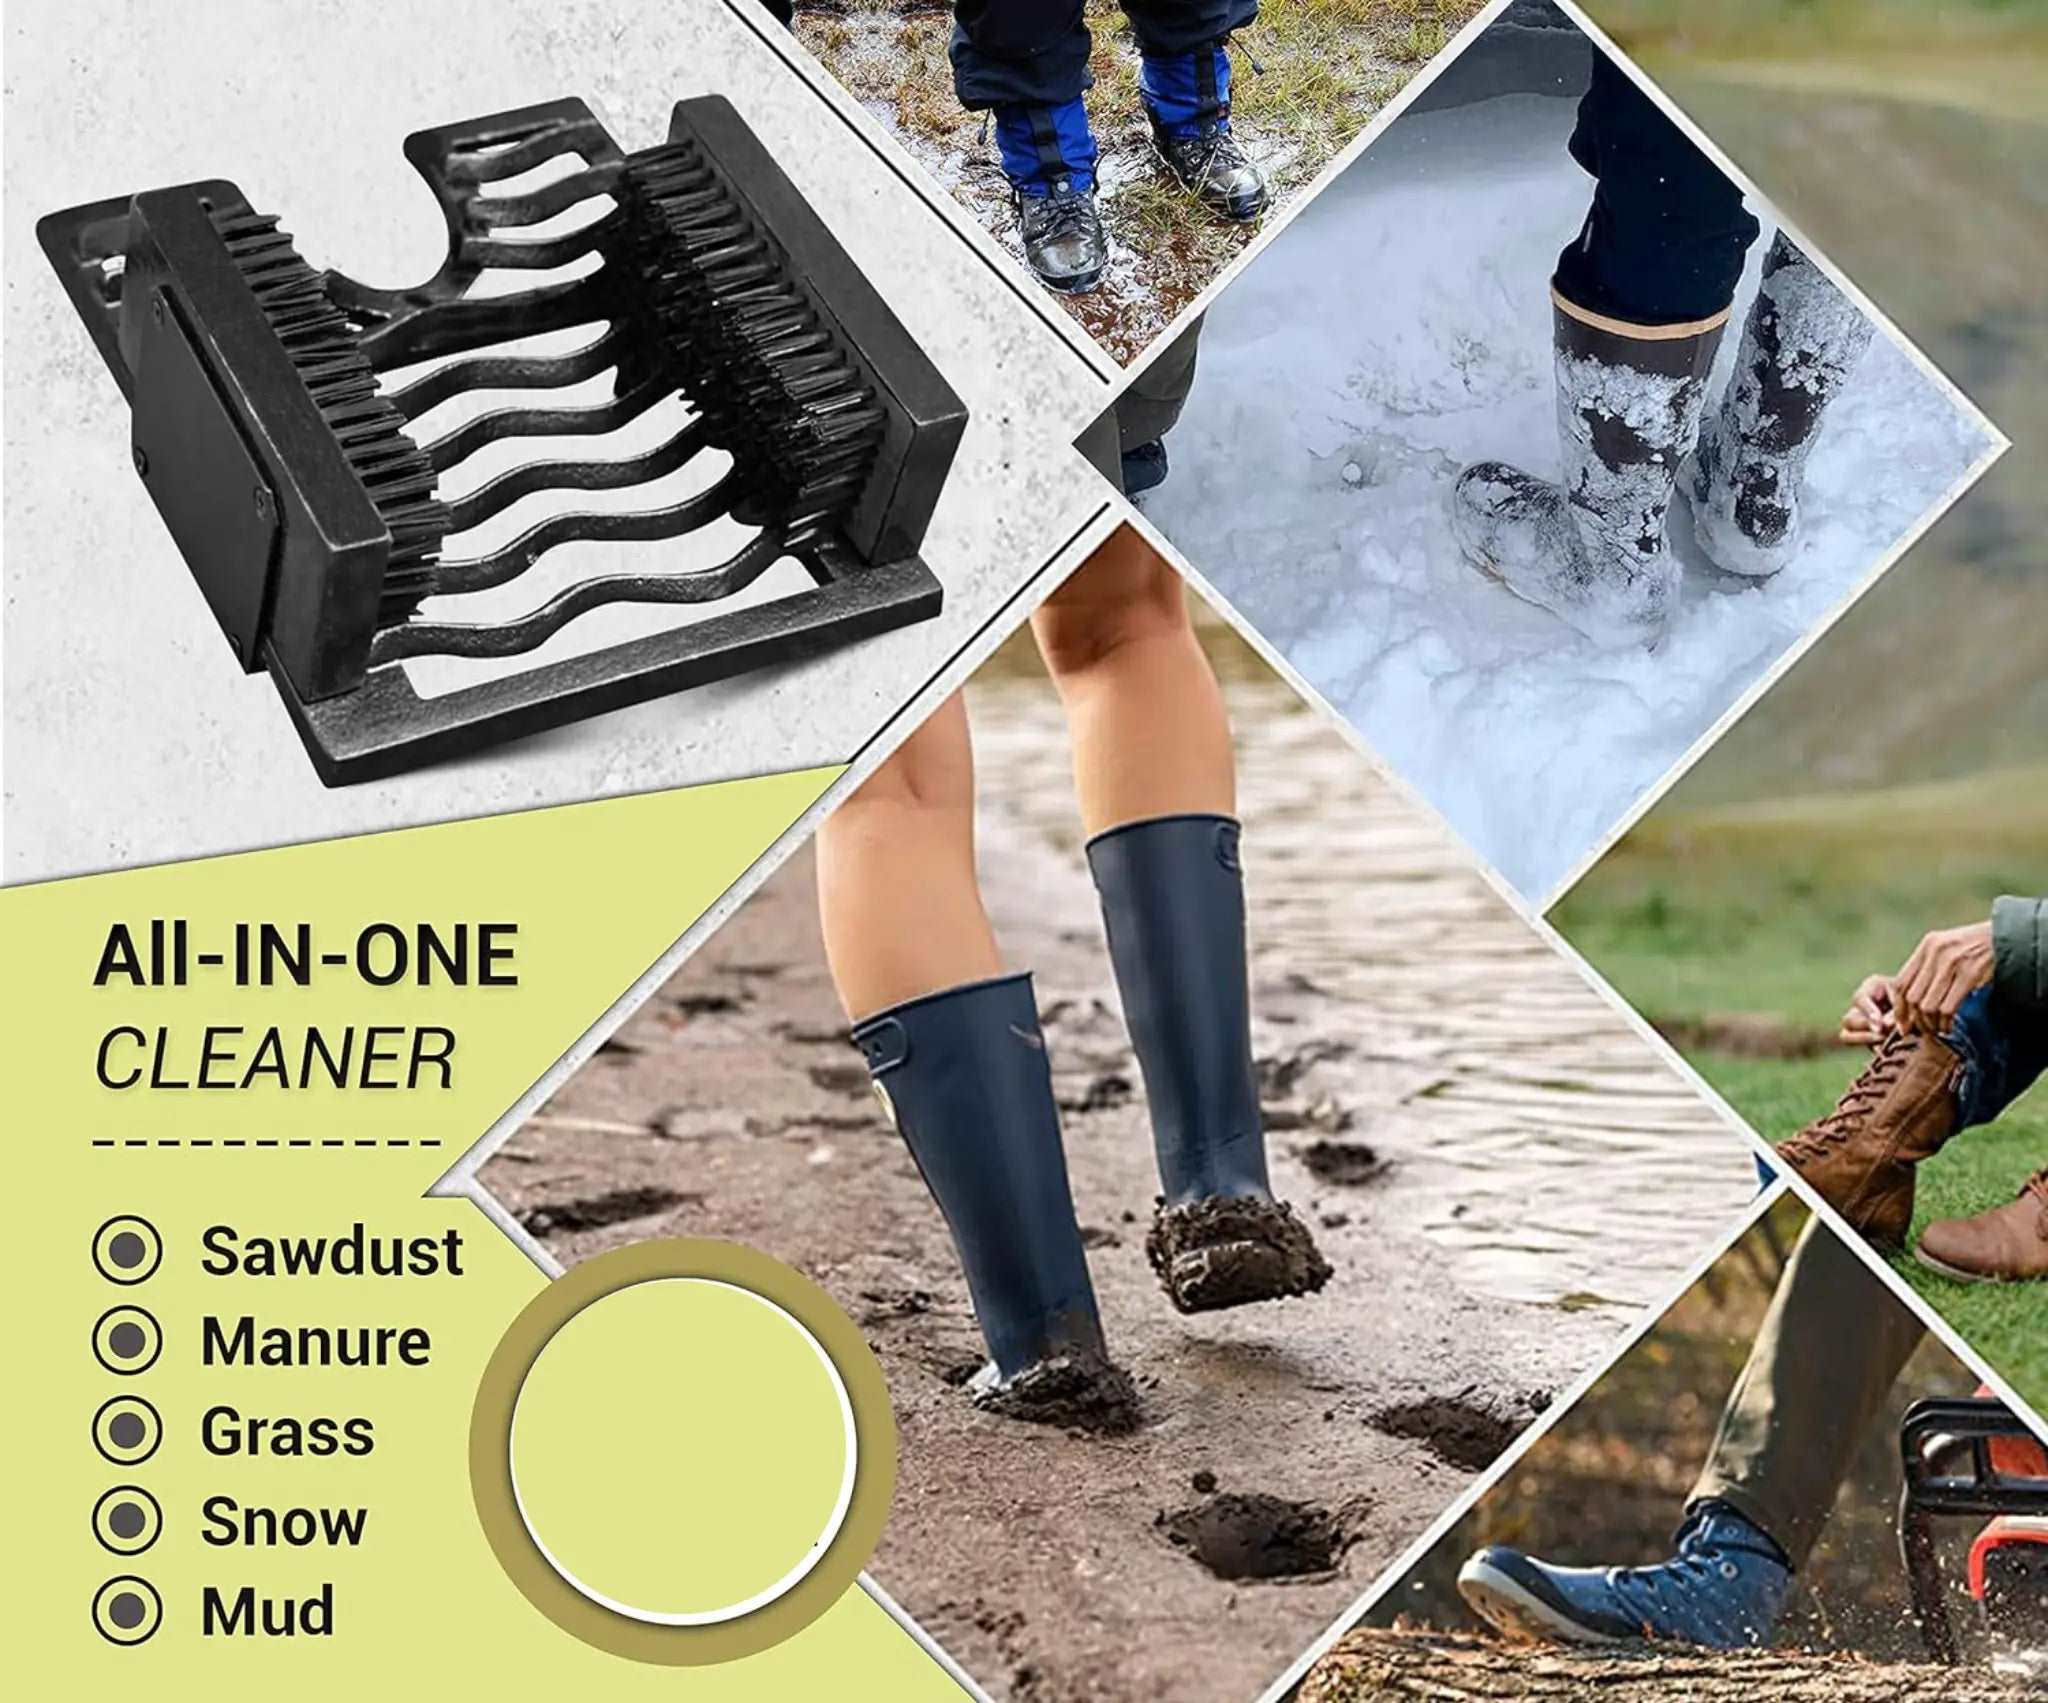 Cast Iron Boot Scraper with Brushes Outdoors - Welly Remover and Stand, Outside Boot Cleaner Brush